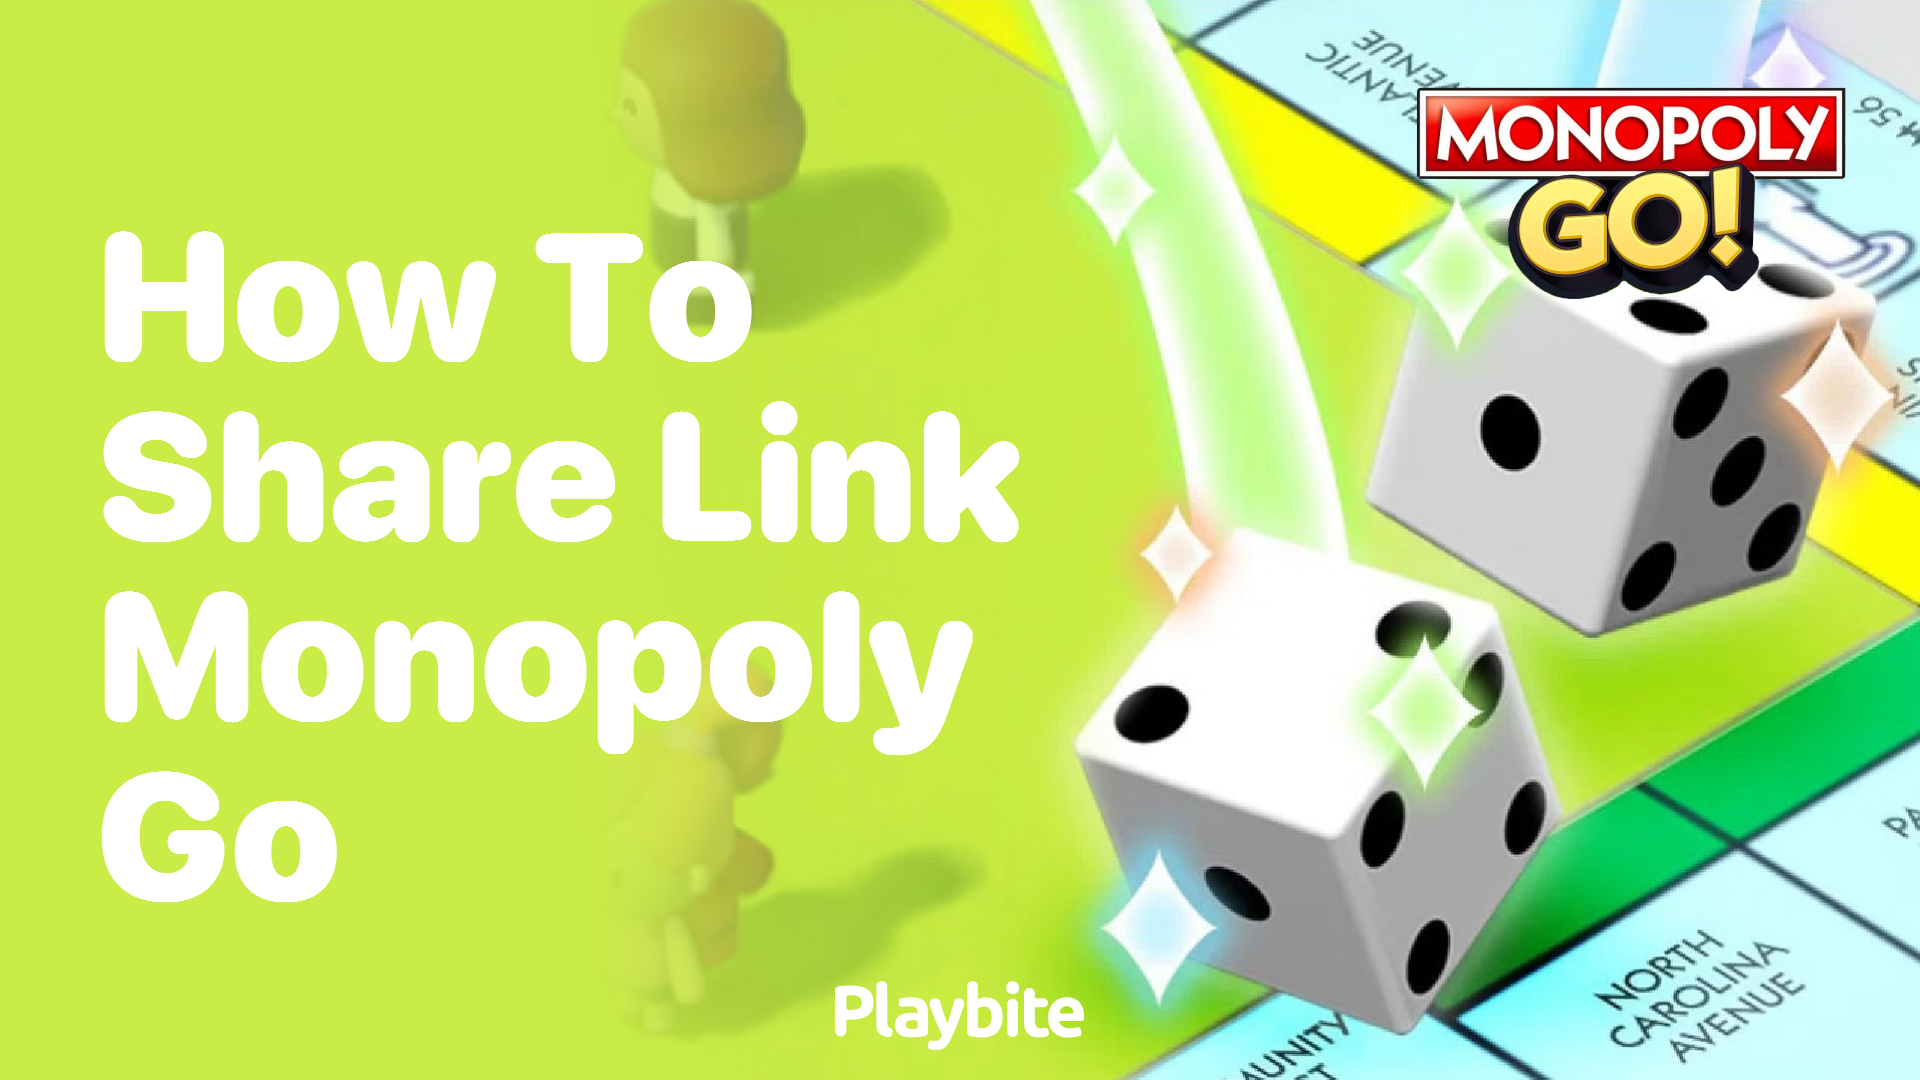 How to Share a Link in Monopoly Go